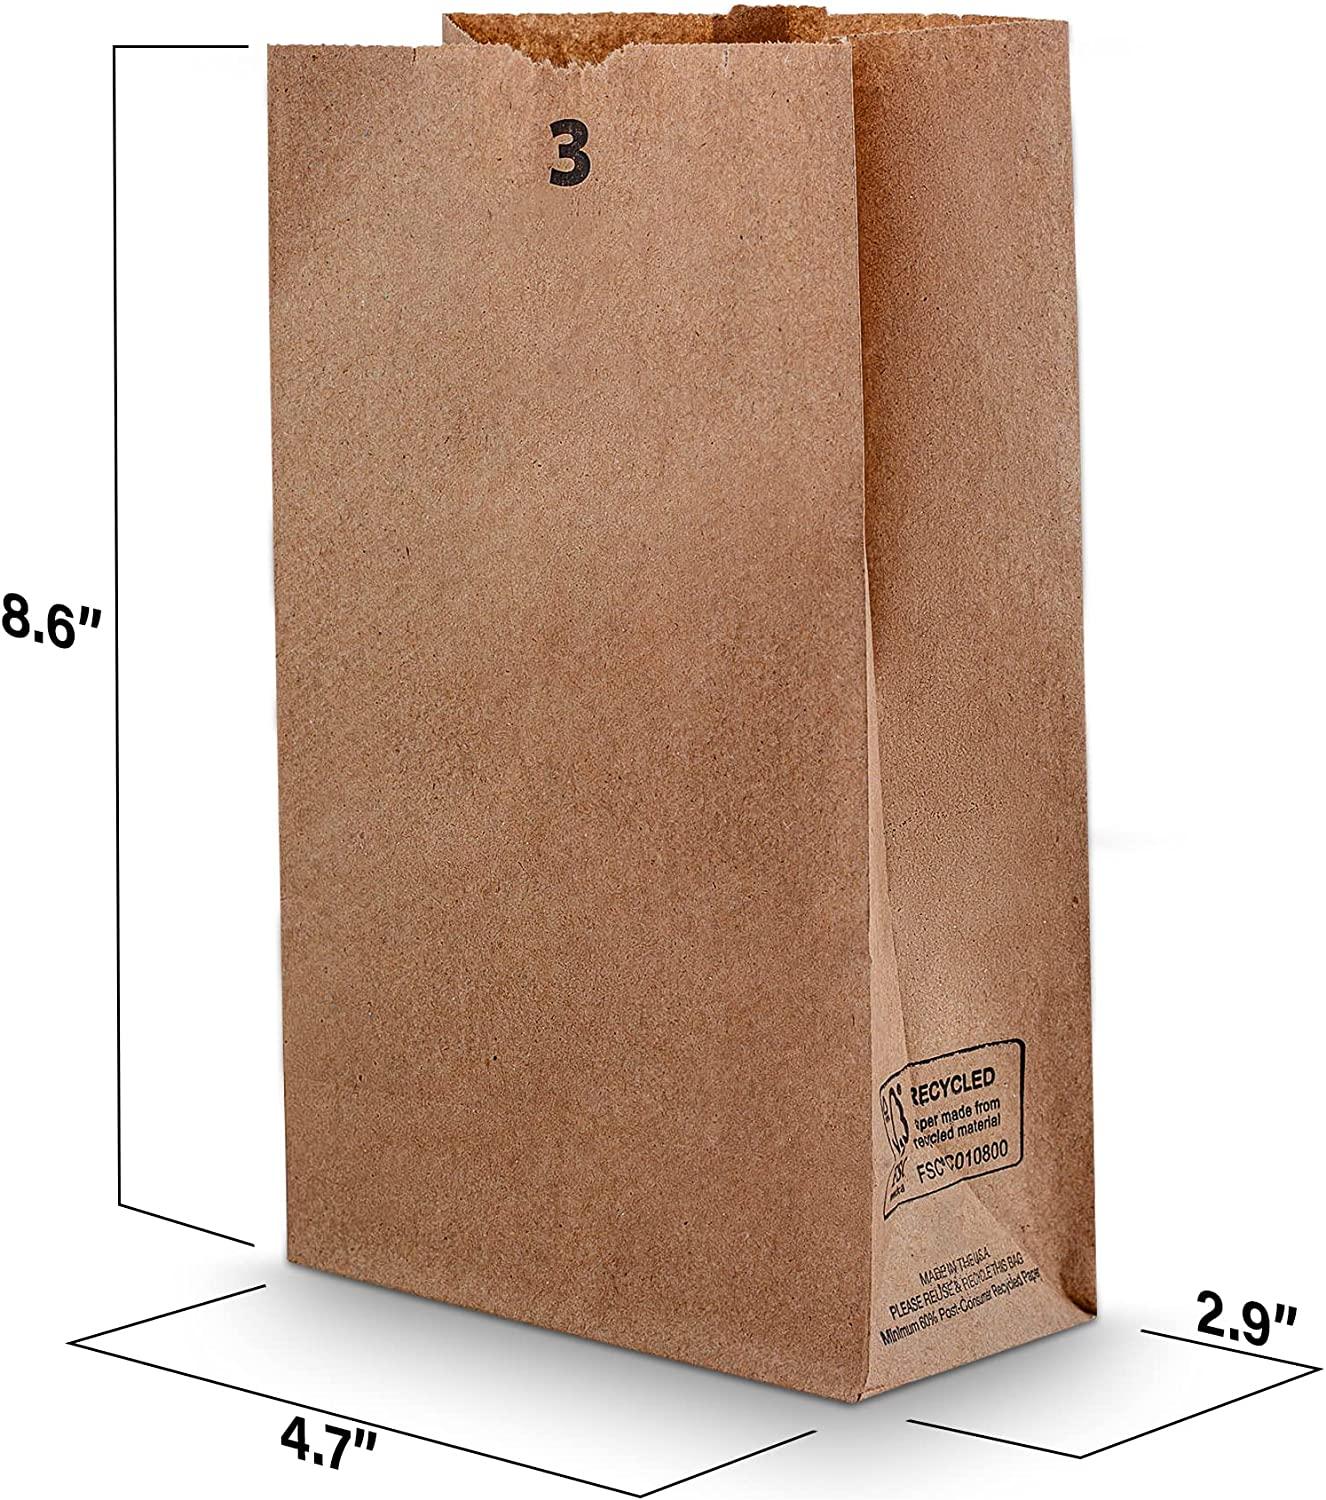 3D recycled paper bags - TurboSquid 1536621